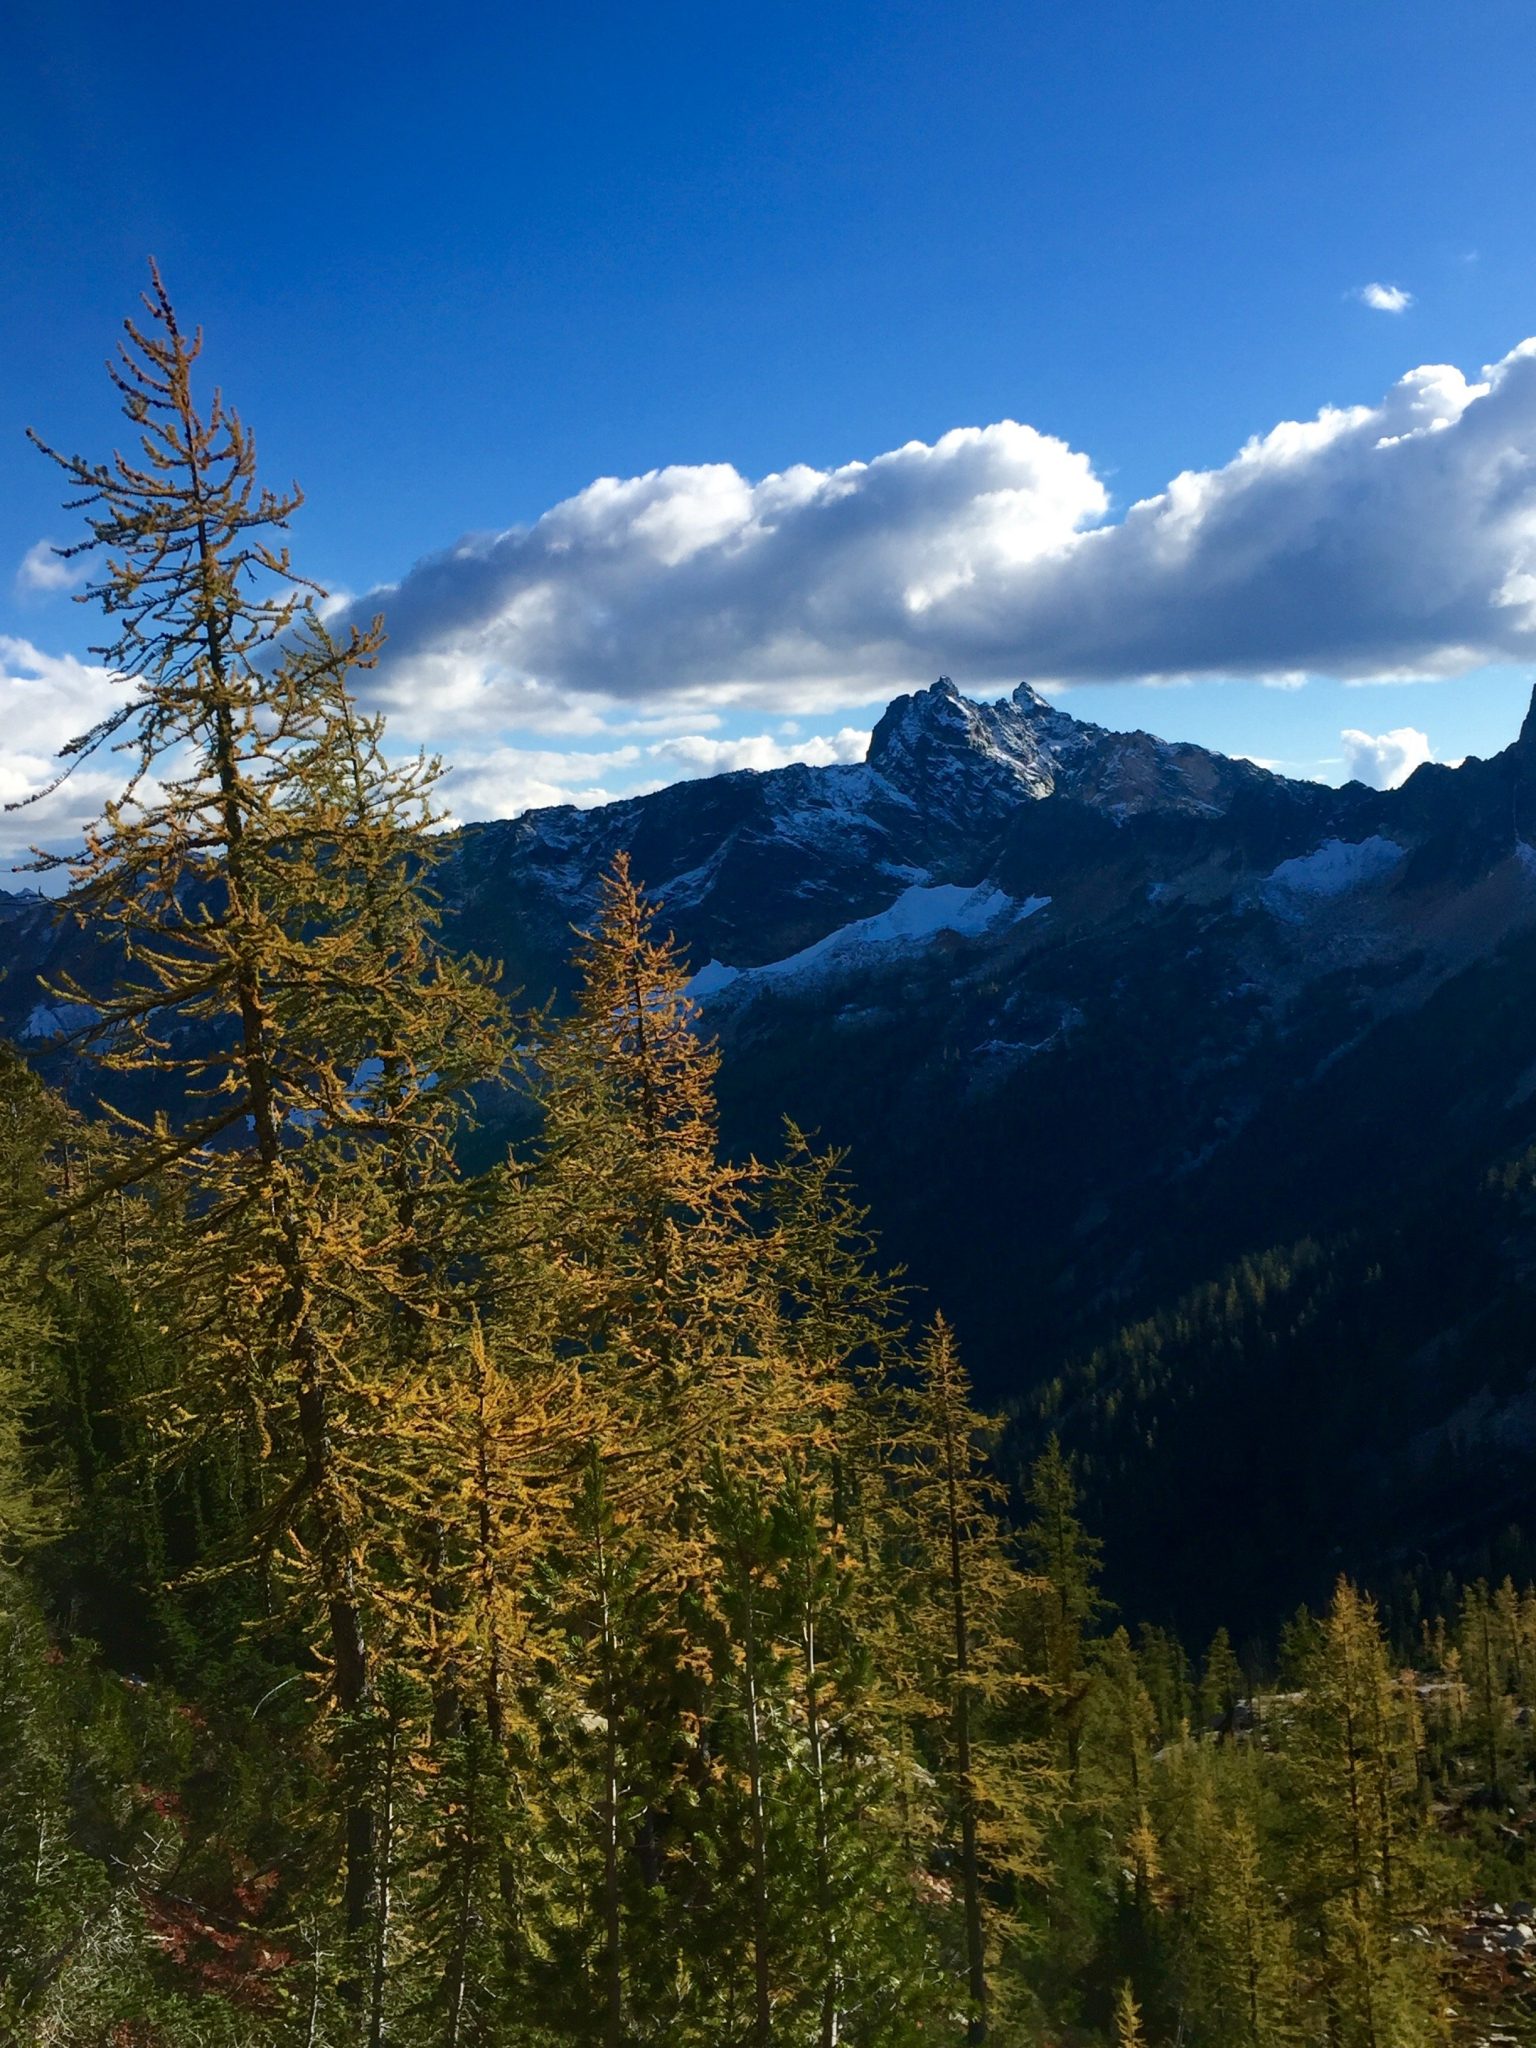 Golden larches and snow dusted peaks in the North Cascades